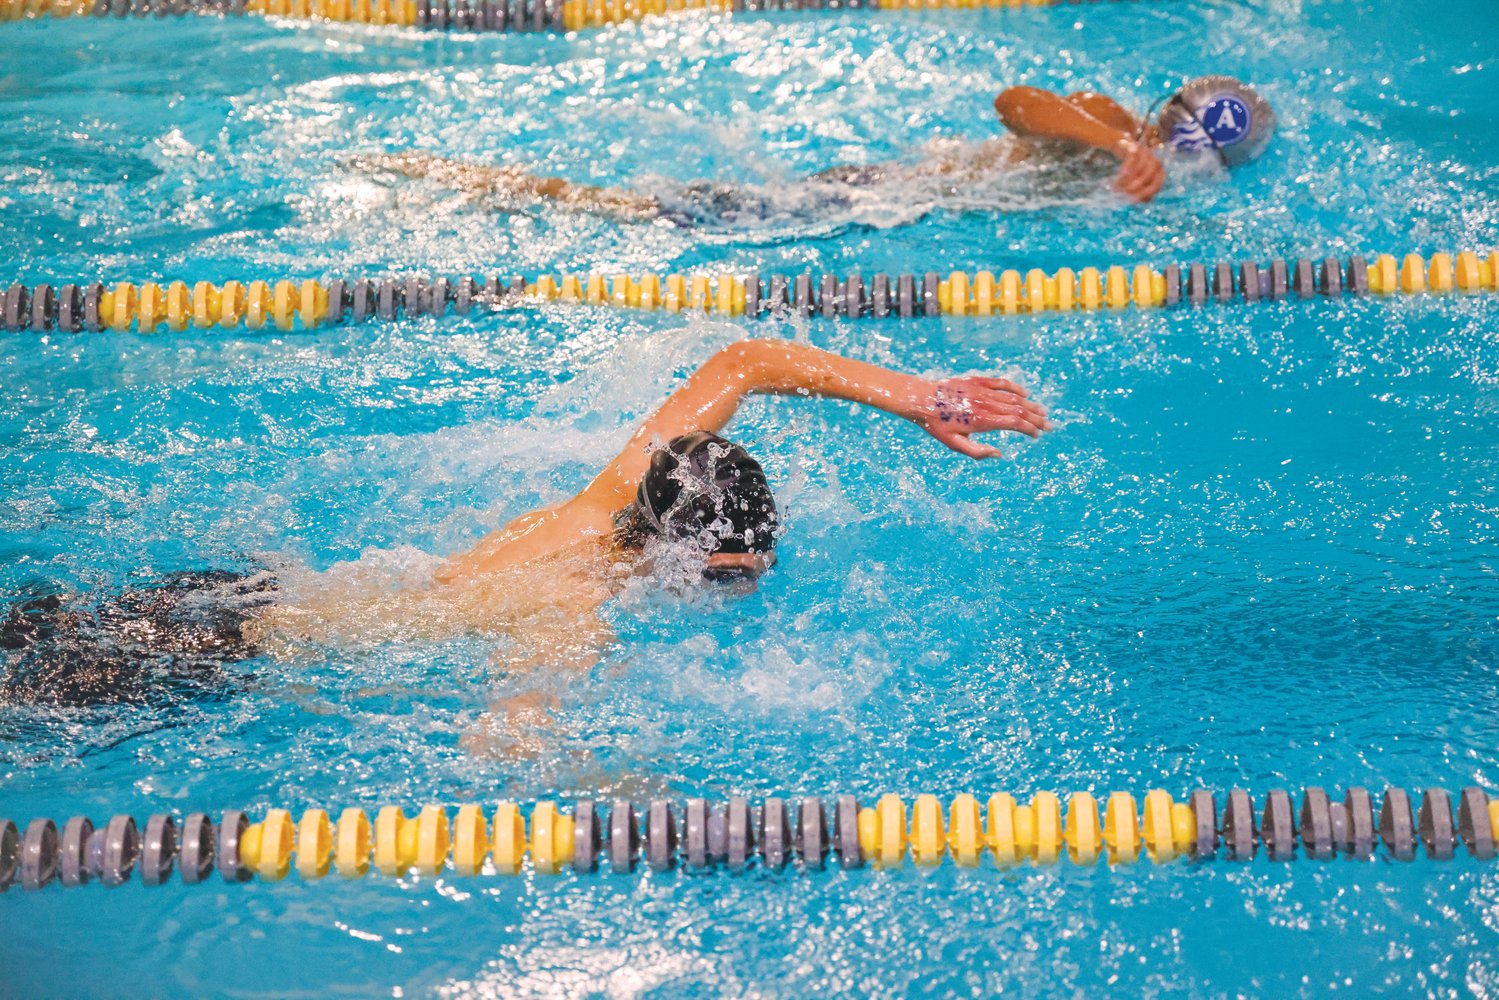 Jordan-Matthews junior Calvin Conroy slices through the water in one of his freestyle events at a swim meet in Asheboro last Thursday. Conroy placed 7th (3:55.77) and 9th (1:47.29) in the 200-meter freestyle and 100-meter freestyle, respectively.